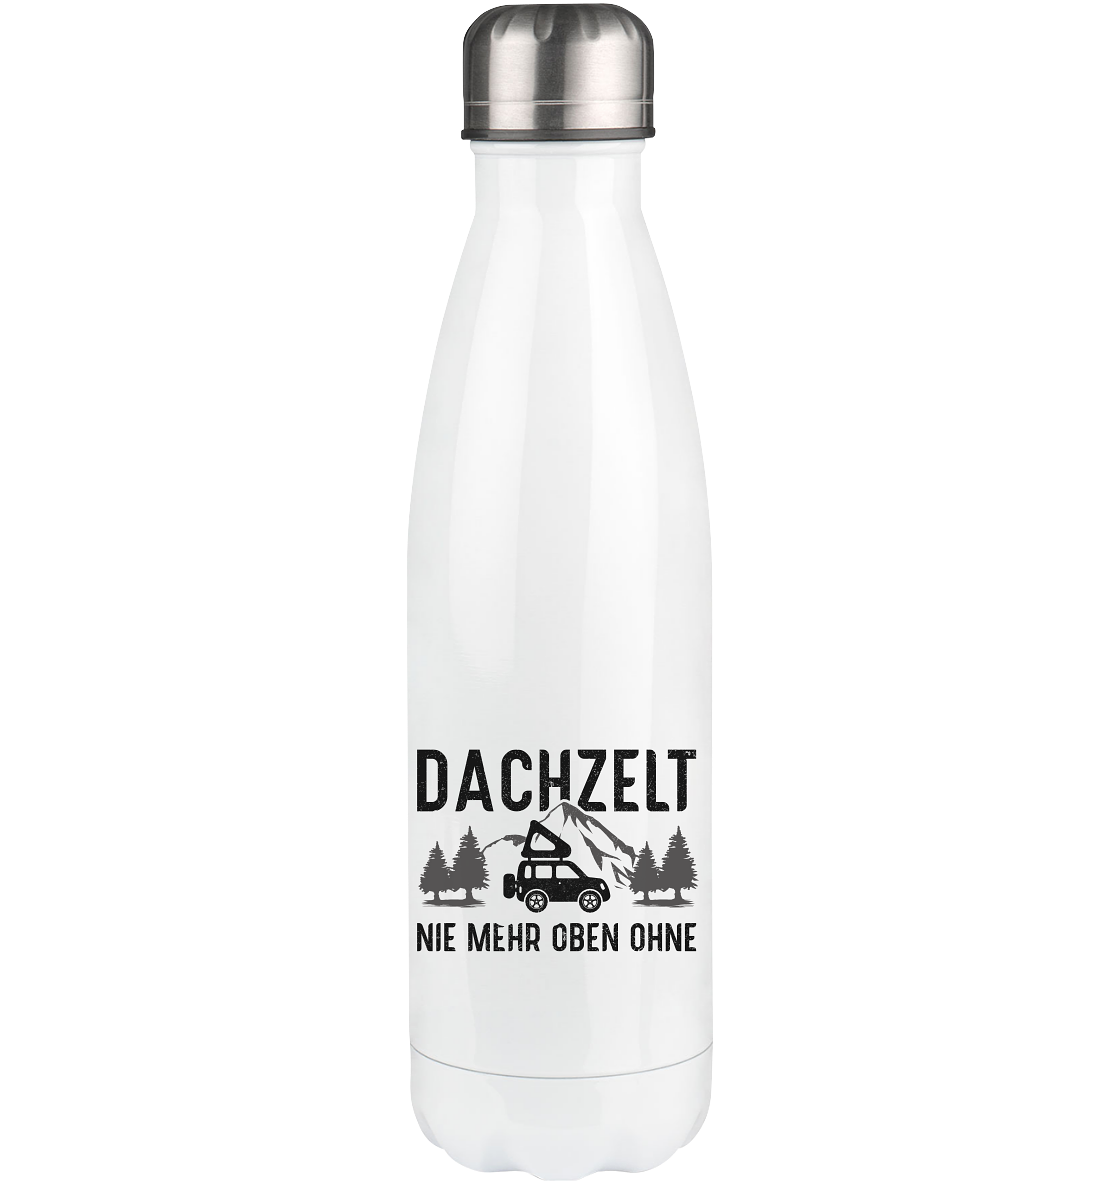 Dachzelt - Edelstahl Thermosflasche camping 500ml